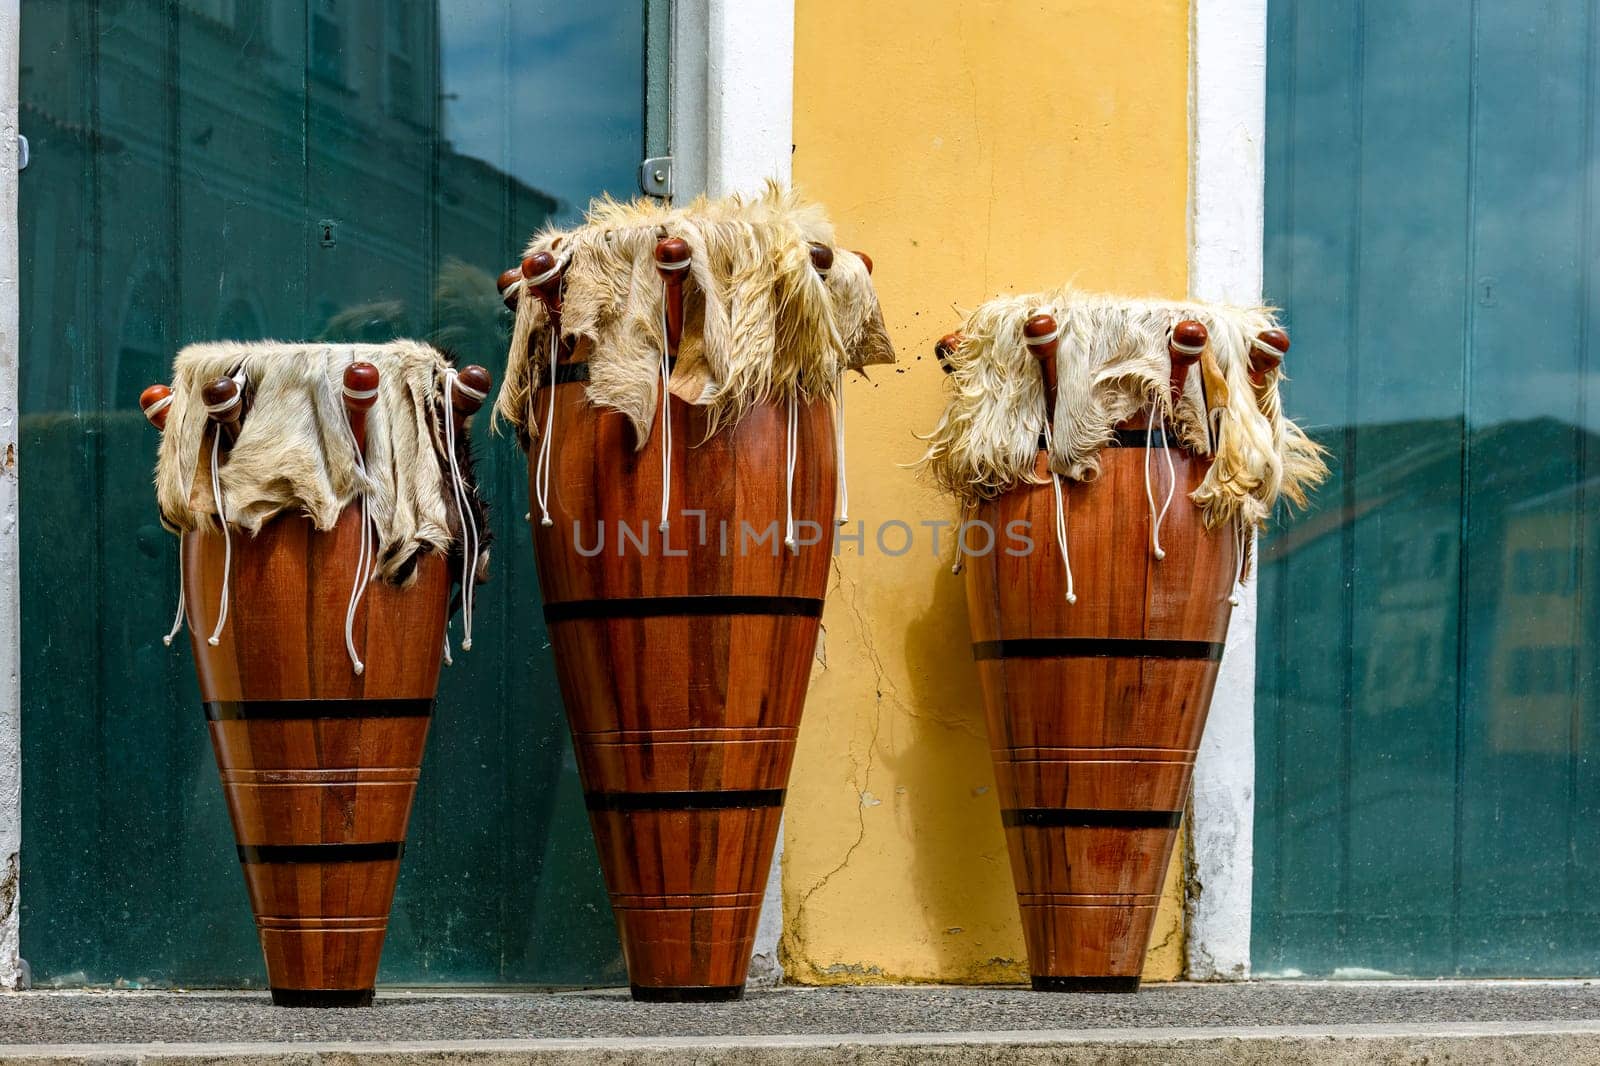 Ethnic drums also called atabaques on the streets of Pelourinho by Fred_Pinheiro